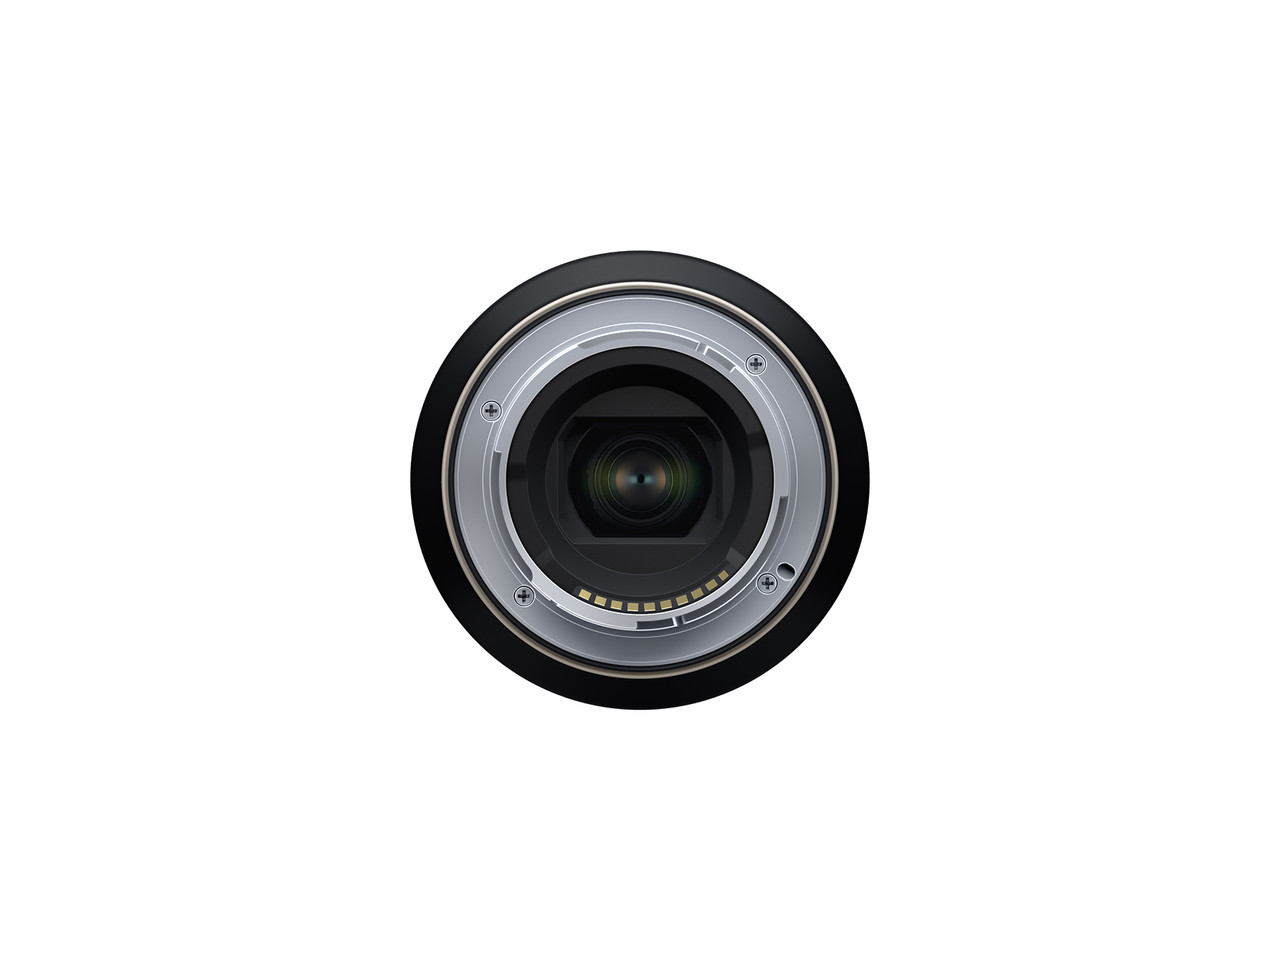 Tamron 35mm f/2.8 DI III OSD Lens for Sony FE | Bedfords.com